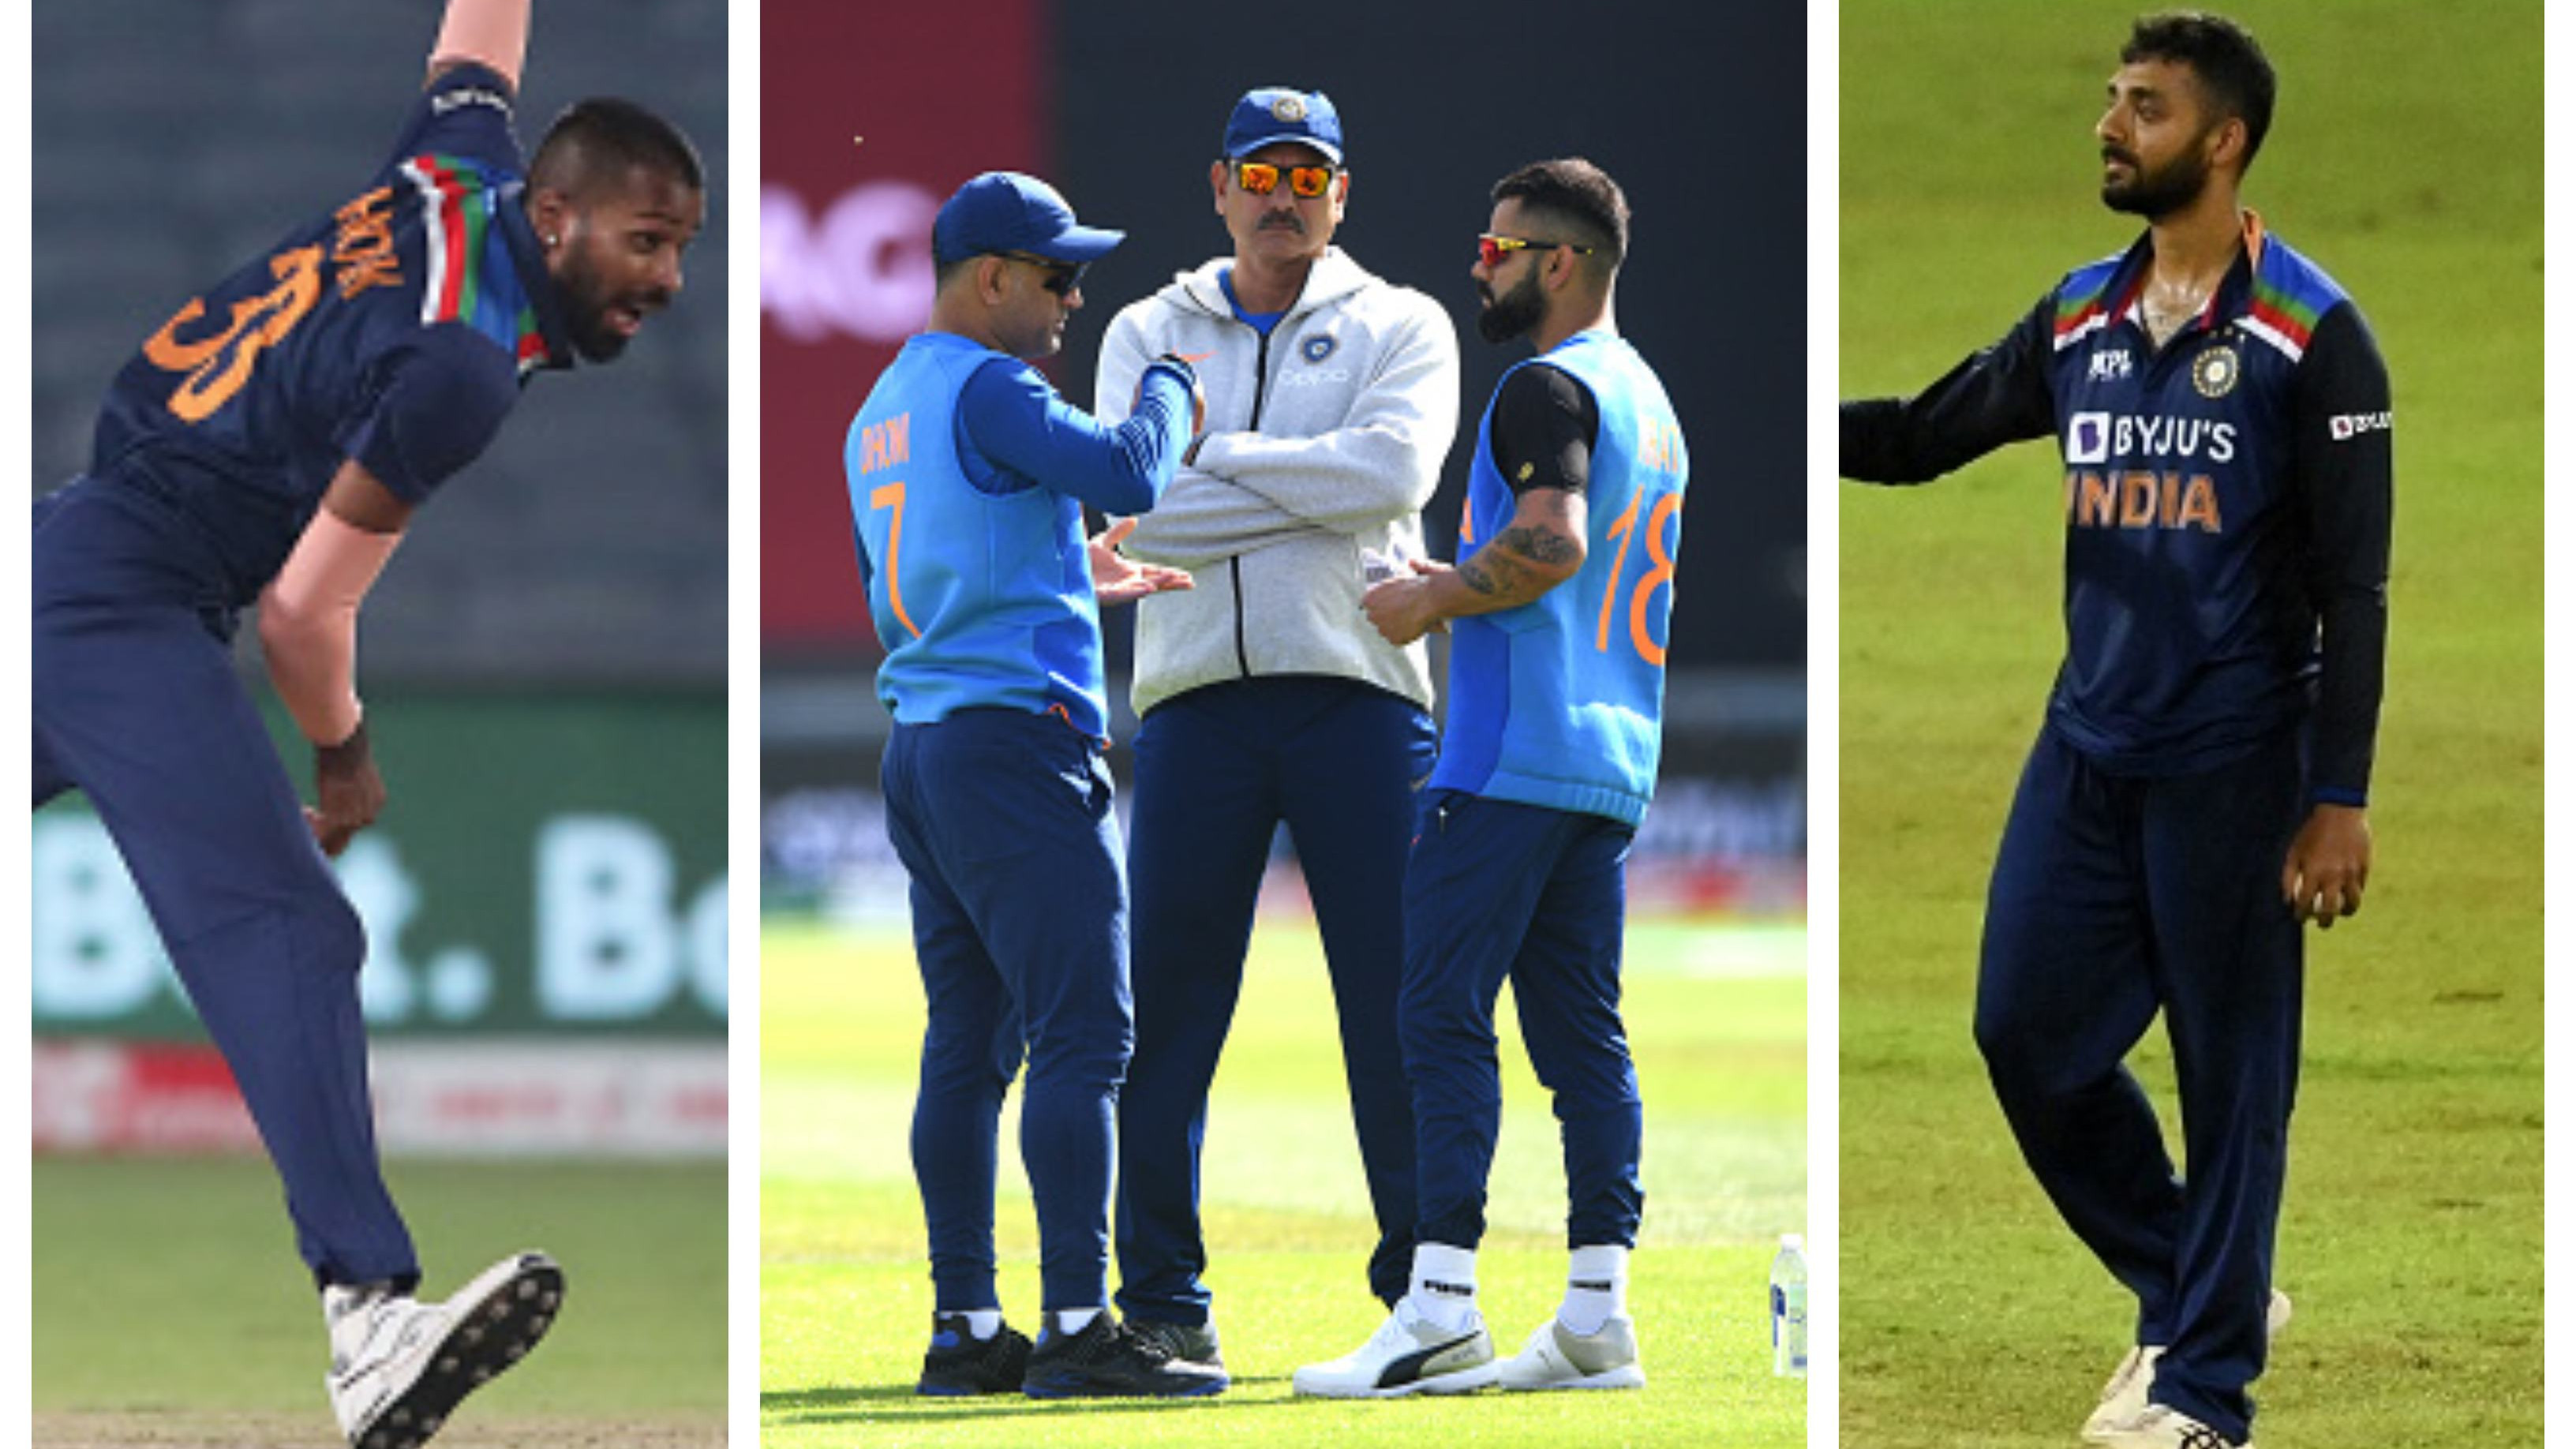 T20 World Cup 2021: Mentor Dhoni to sit with Kohli, Rohit and Shastri to take a call on Hardik and Varun – Report